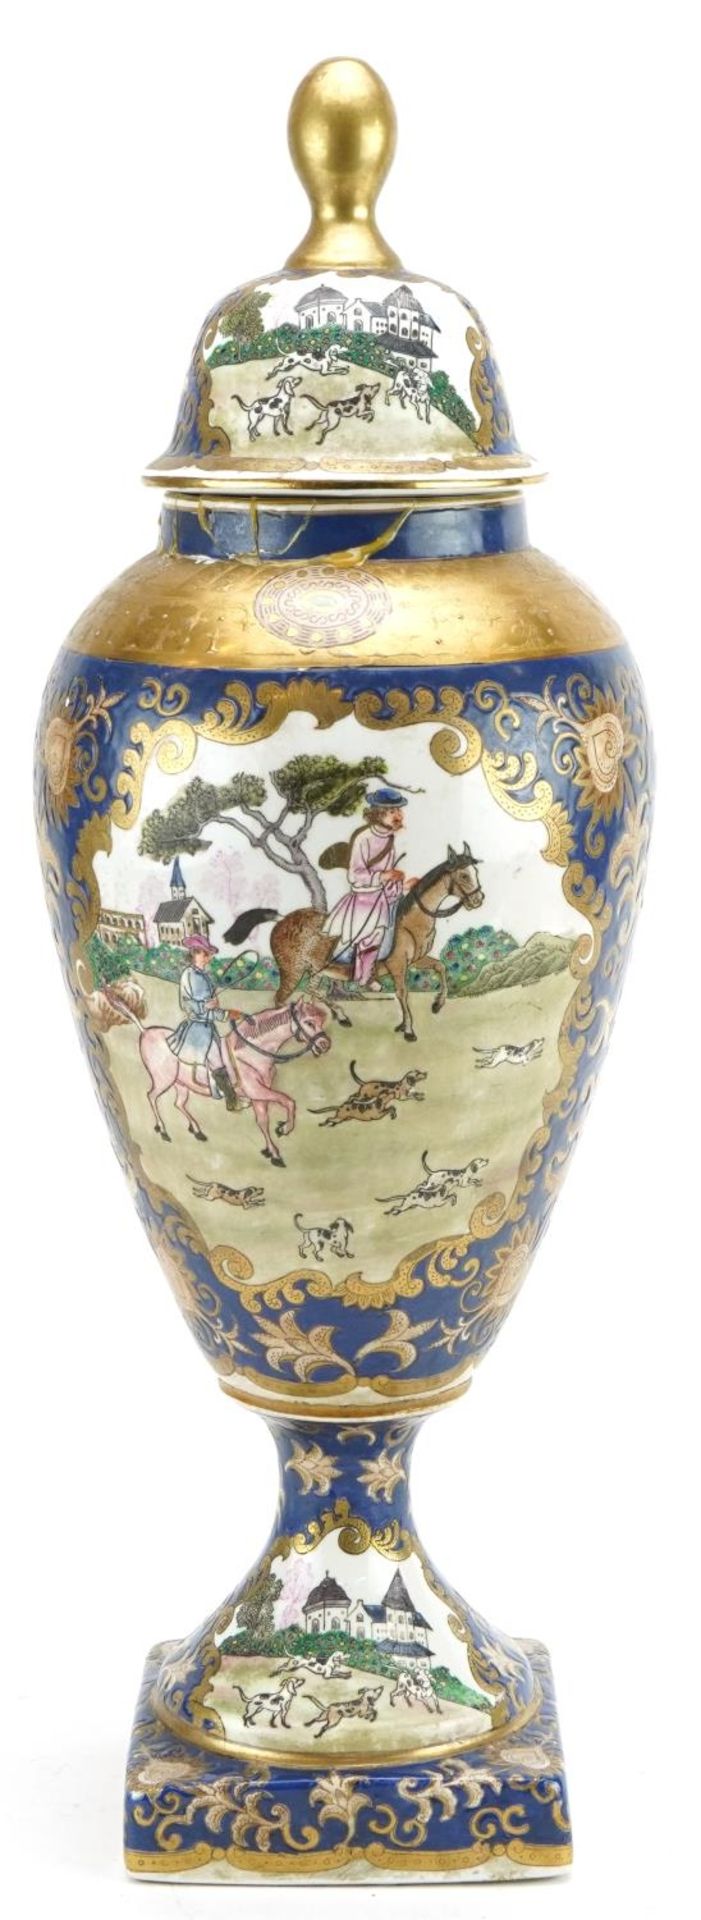 European Chinese style porcelain vase and cover hand painted with panels of figures and animals, - Image 2 of 3